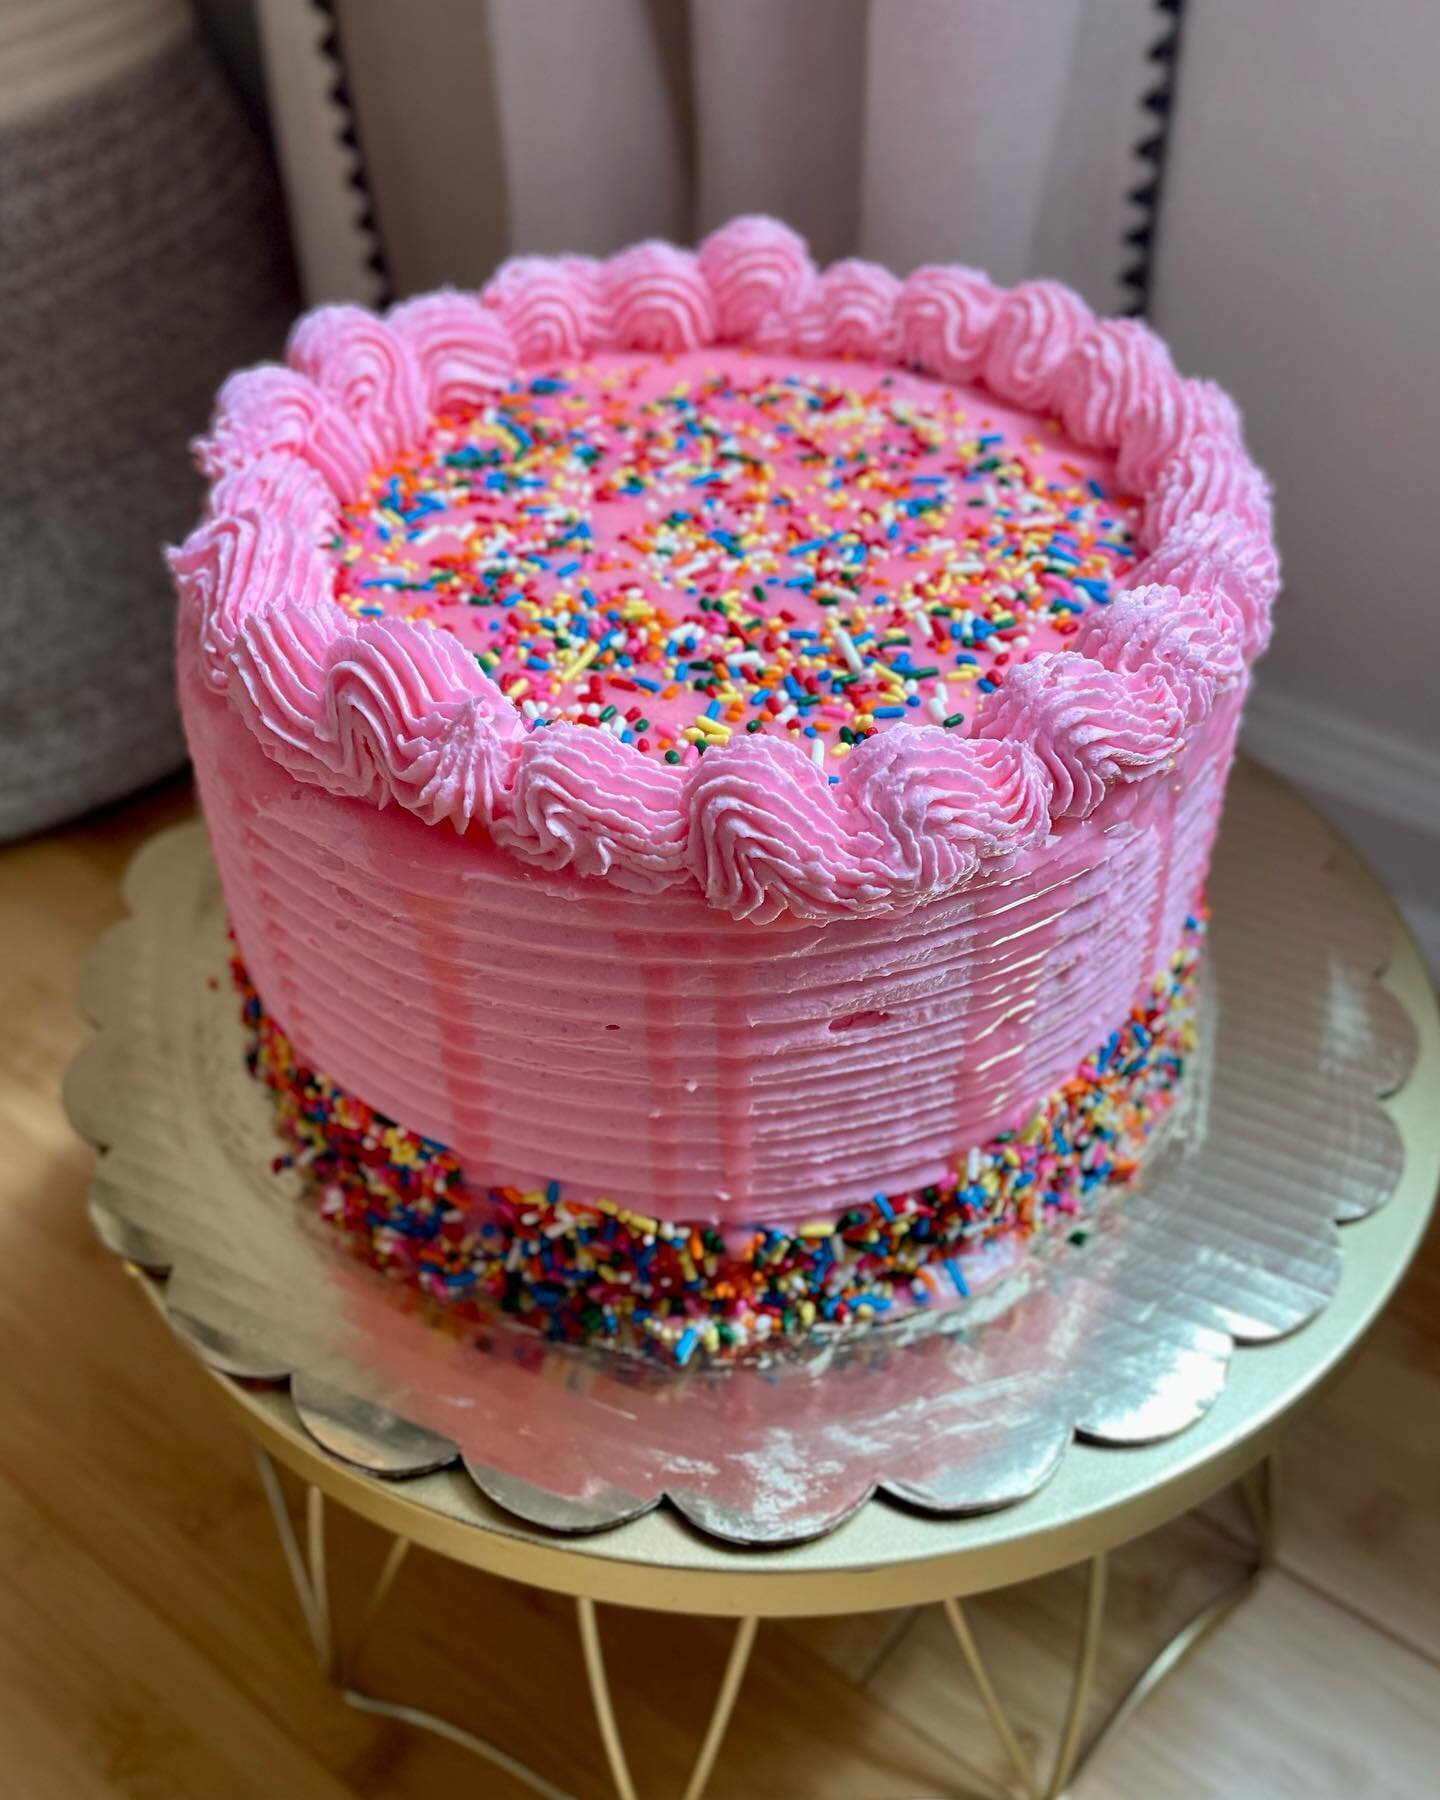 Happy Friday and happy birthday to customer! All she asked for was a pink cake with sprinkles, I finished it off with a white chocolate drip. Custom cakes available, just DM me!

Visit our website at topknotartisanbakery.com

#tkab #topknot #homebake